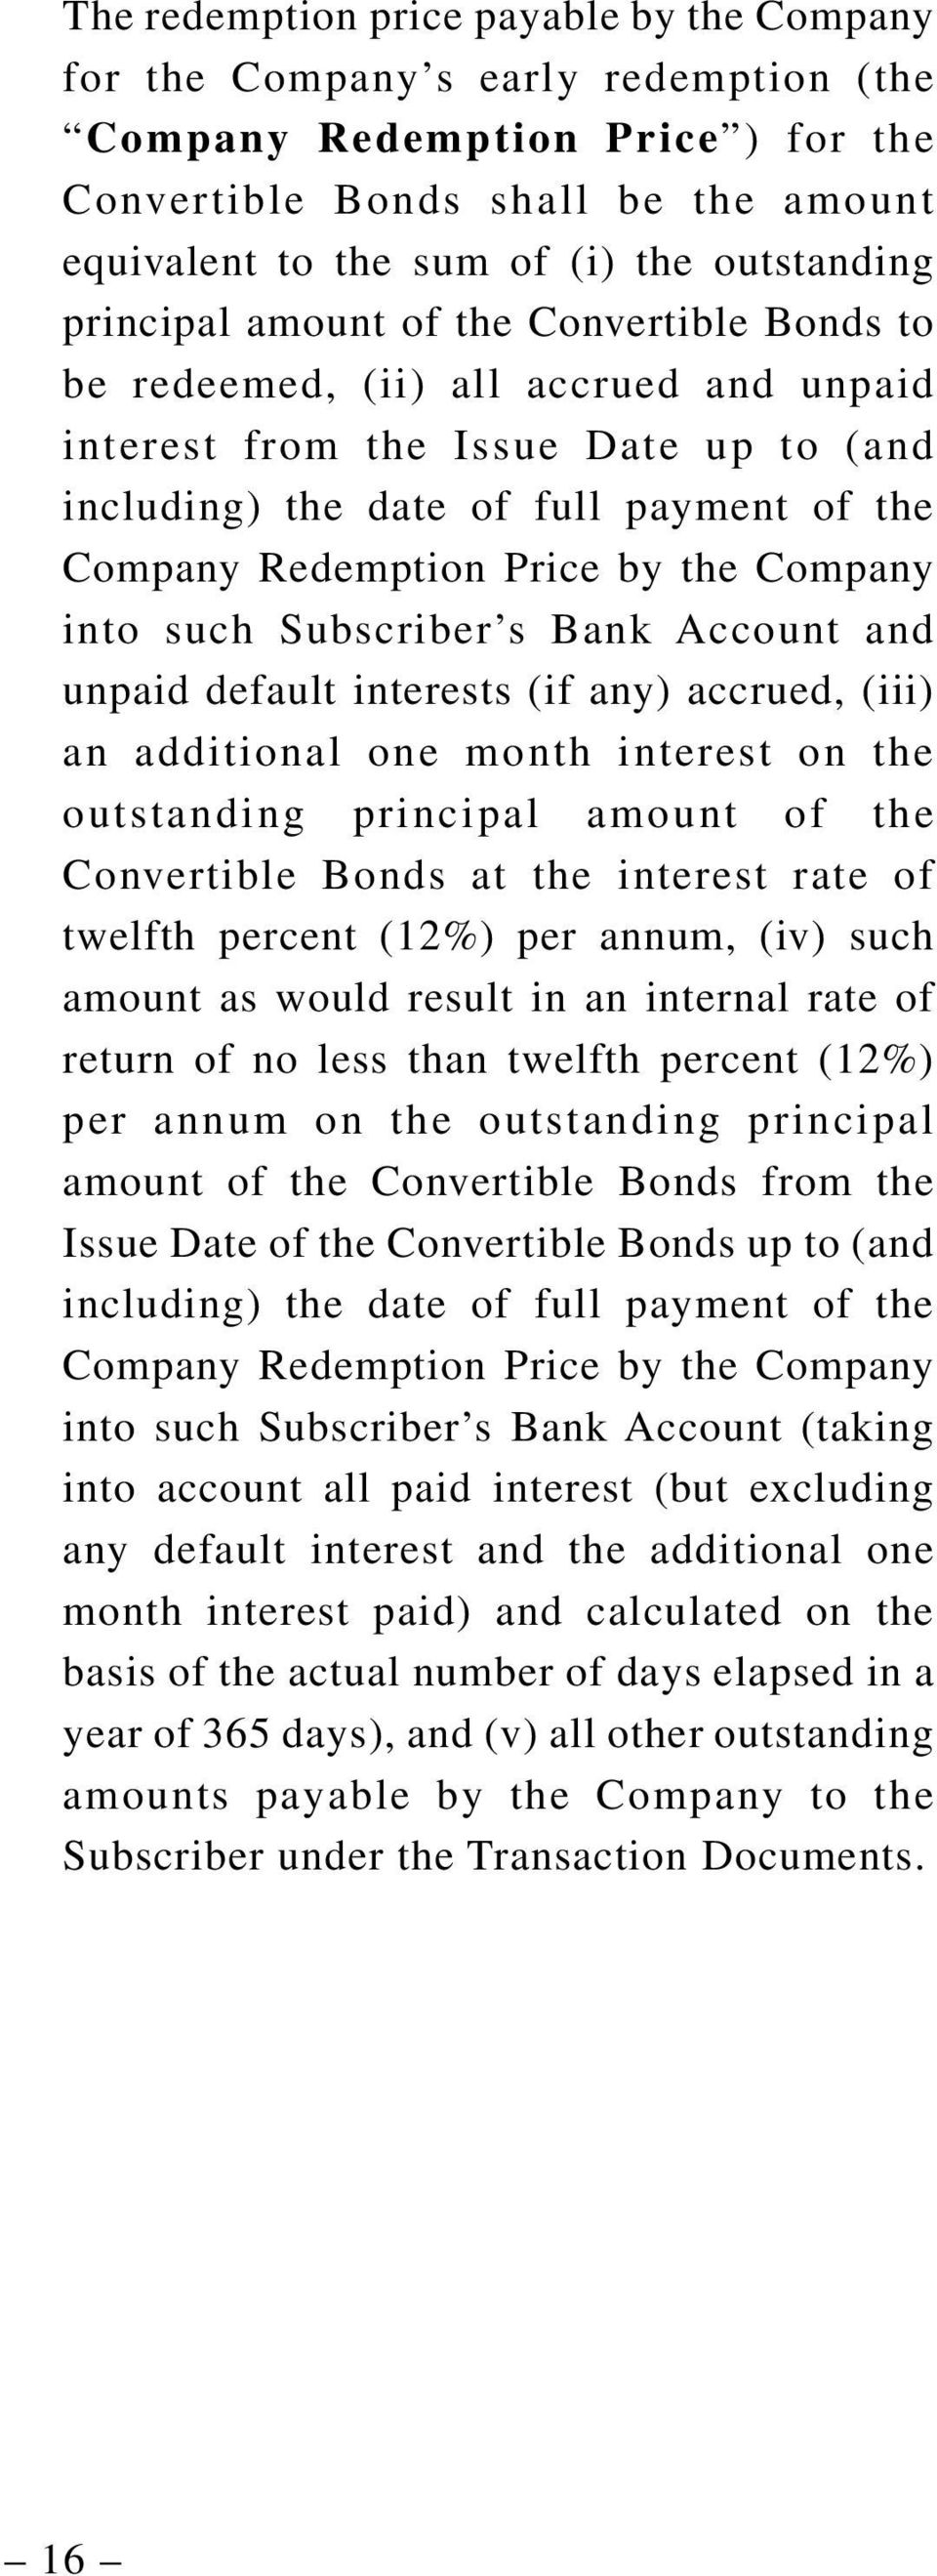 Price by the Company into such Subscriber s Bank Account and unpaid default interests (if any) accrued, (iii) an additional one month interest on the outstanding principal amount of the Convertible